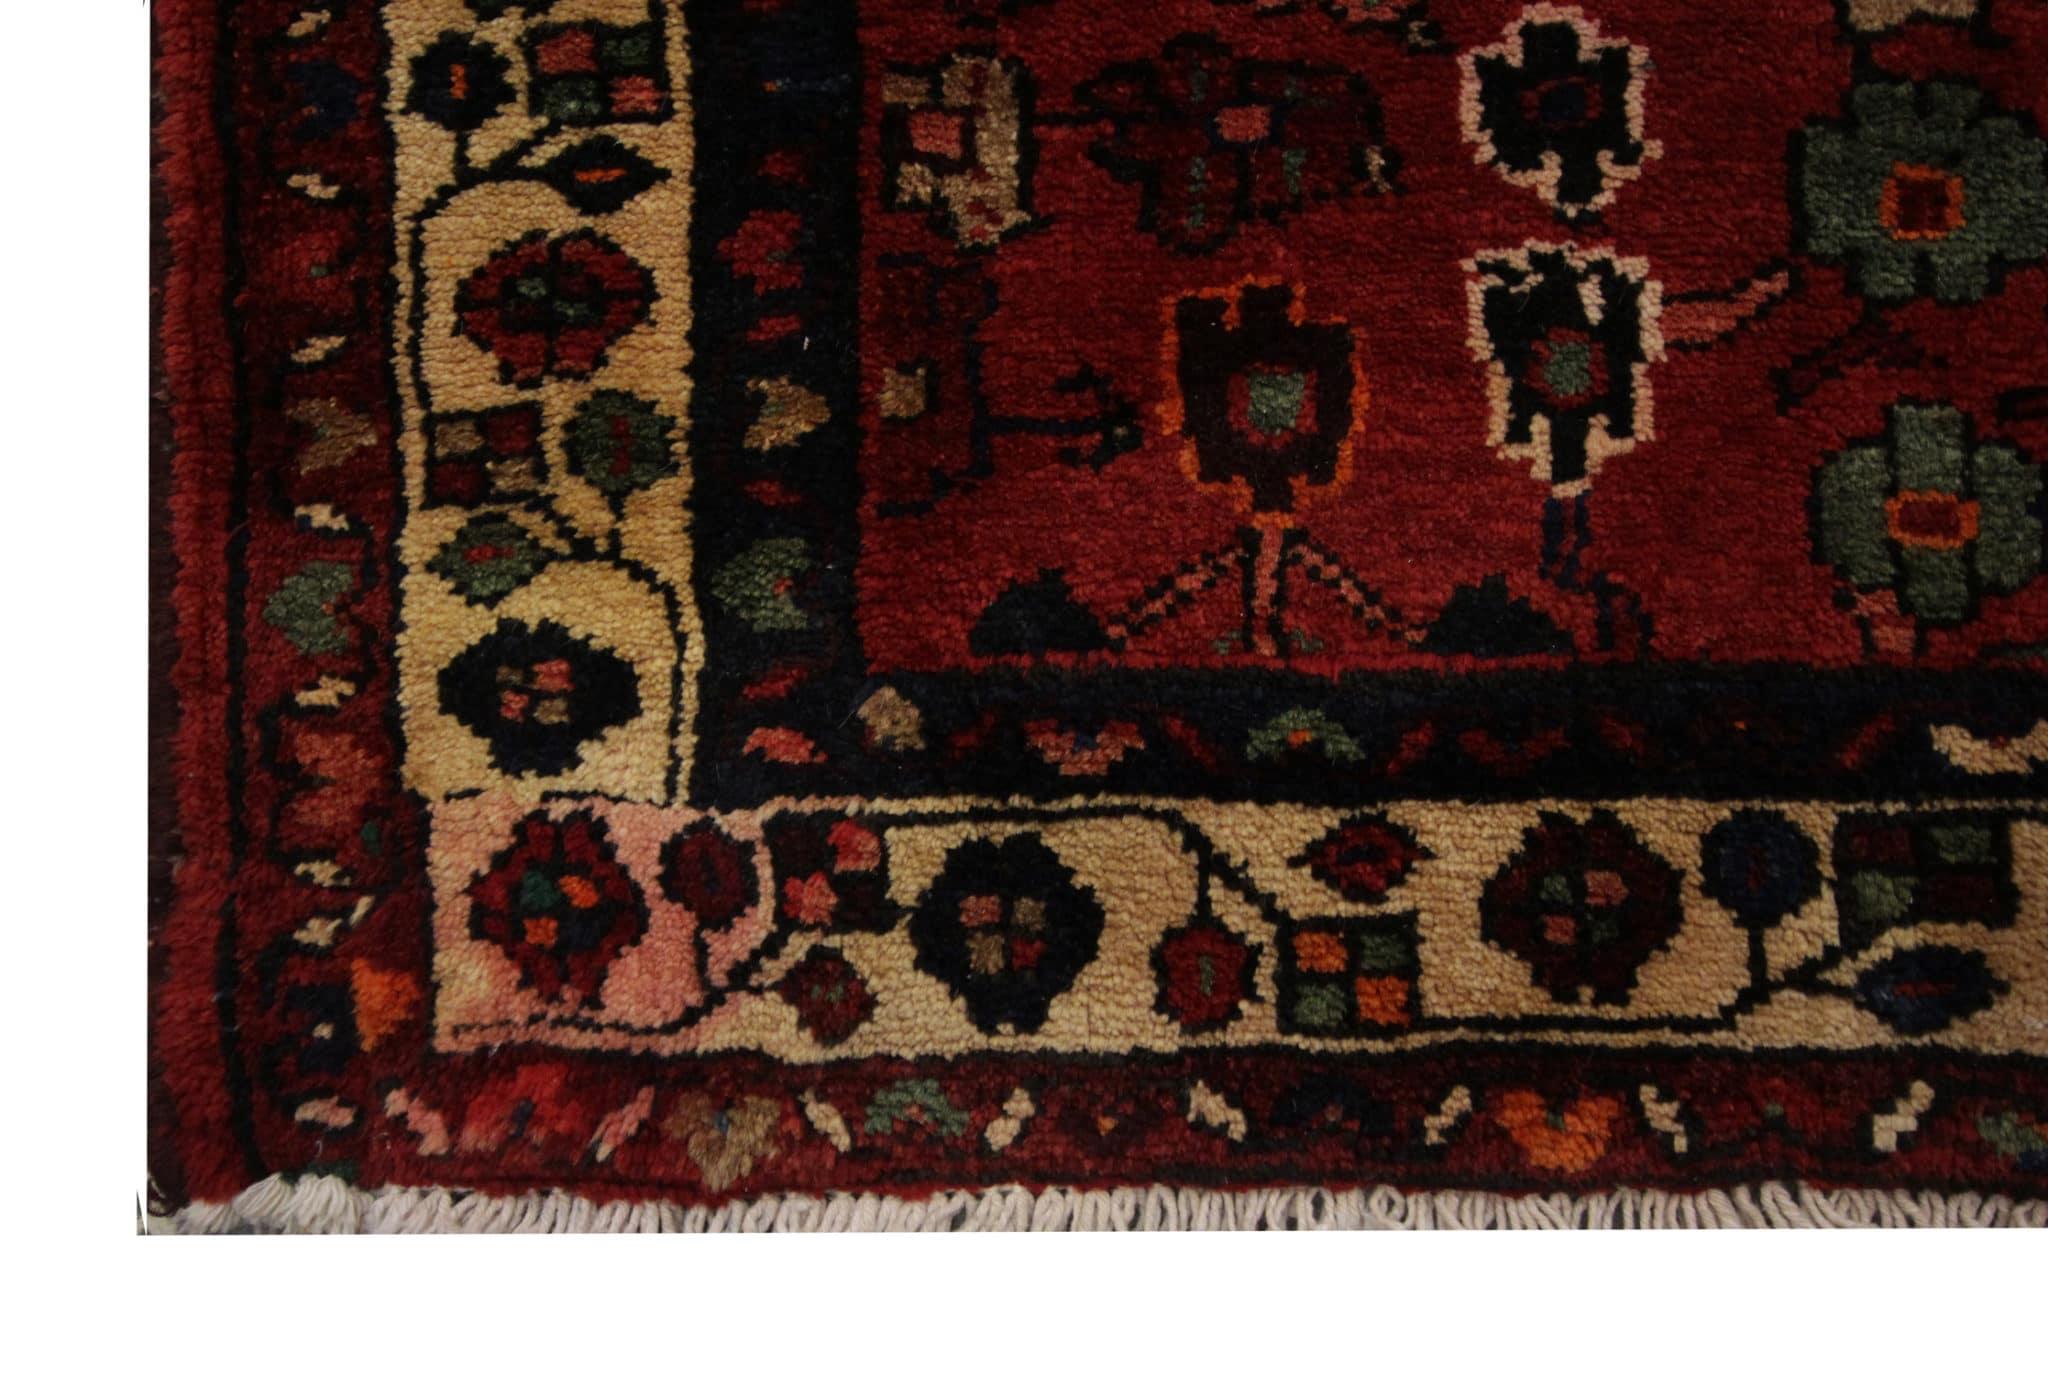 This burgundy runner rug is a magnificent blend of vintage elegance and floral charm. Hand-knotted with precision and crafted to perfection, this exquisite piece carries the legacy of the 1950s, radiating an aura of authenticity and history.